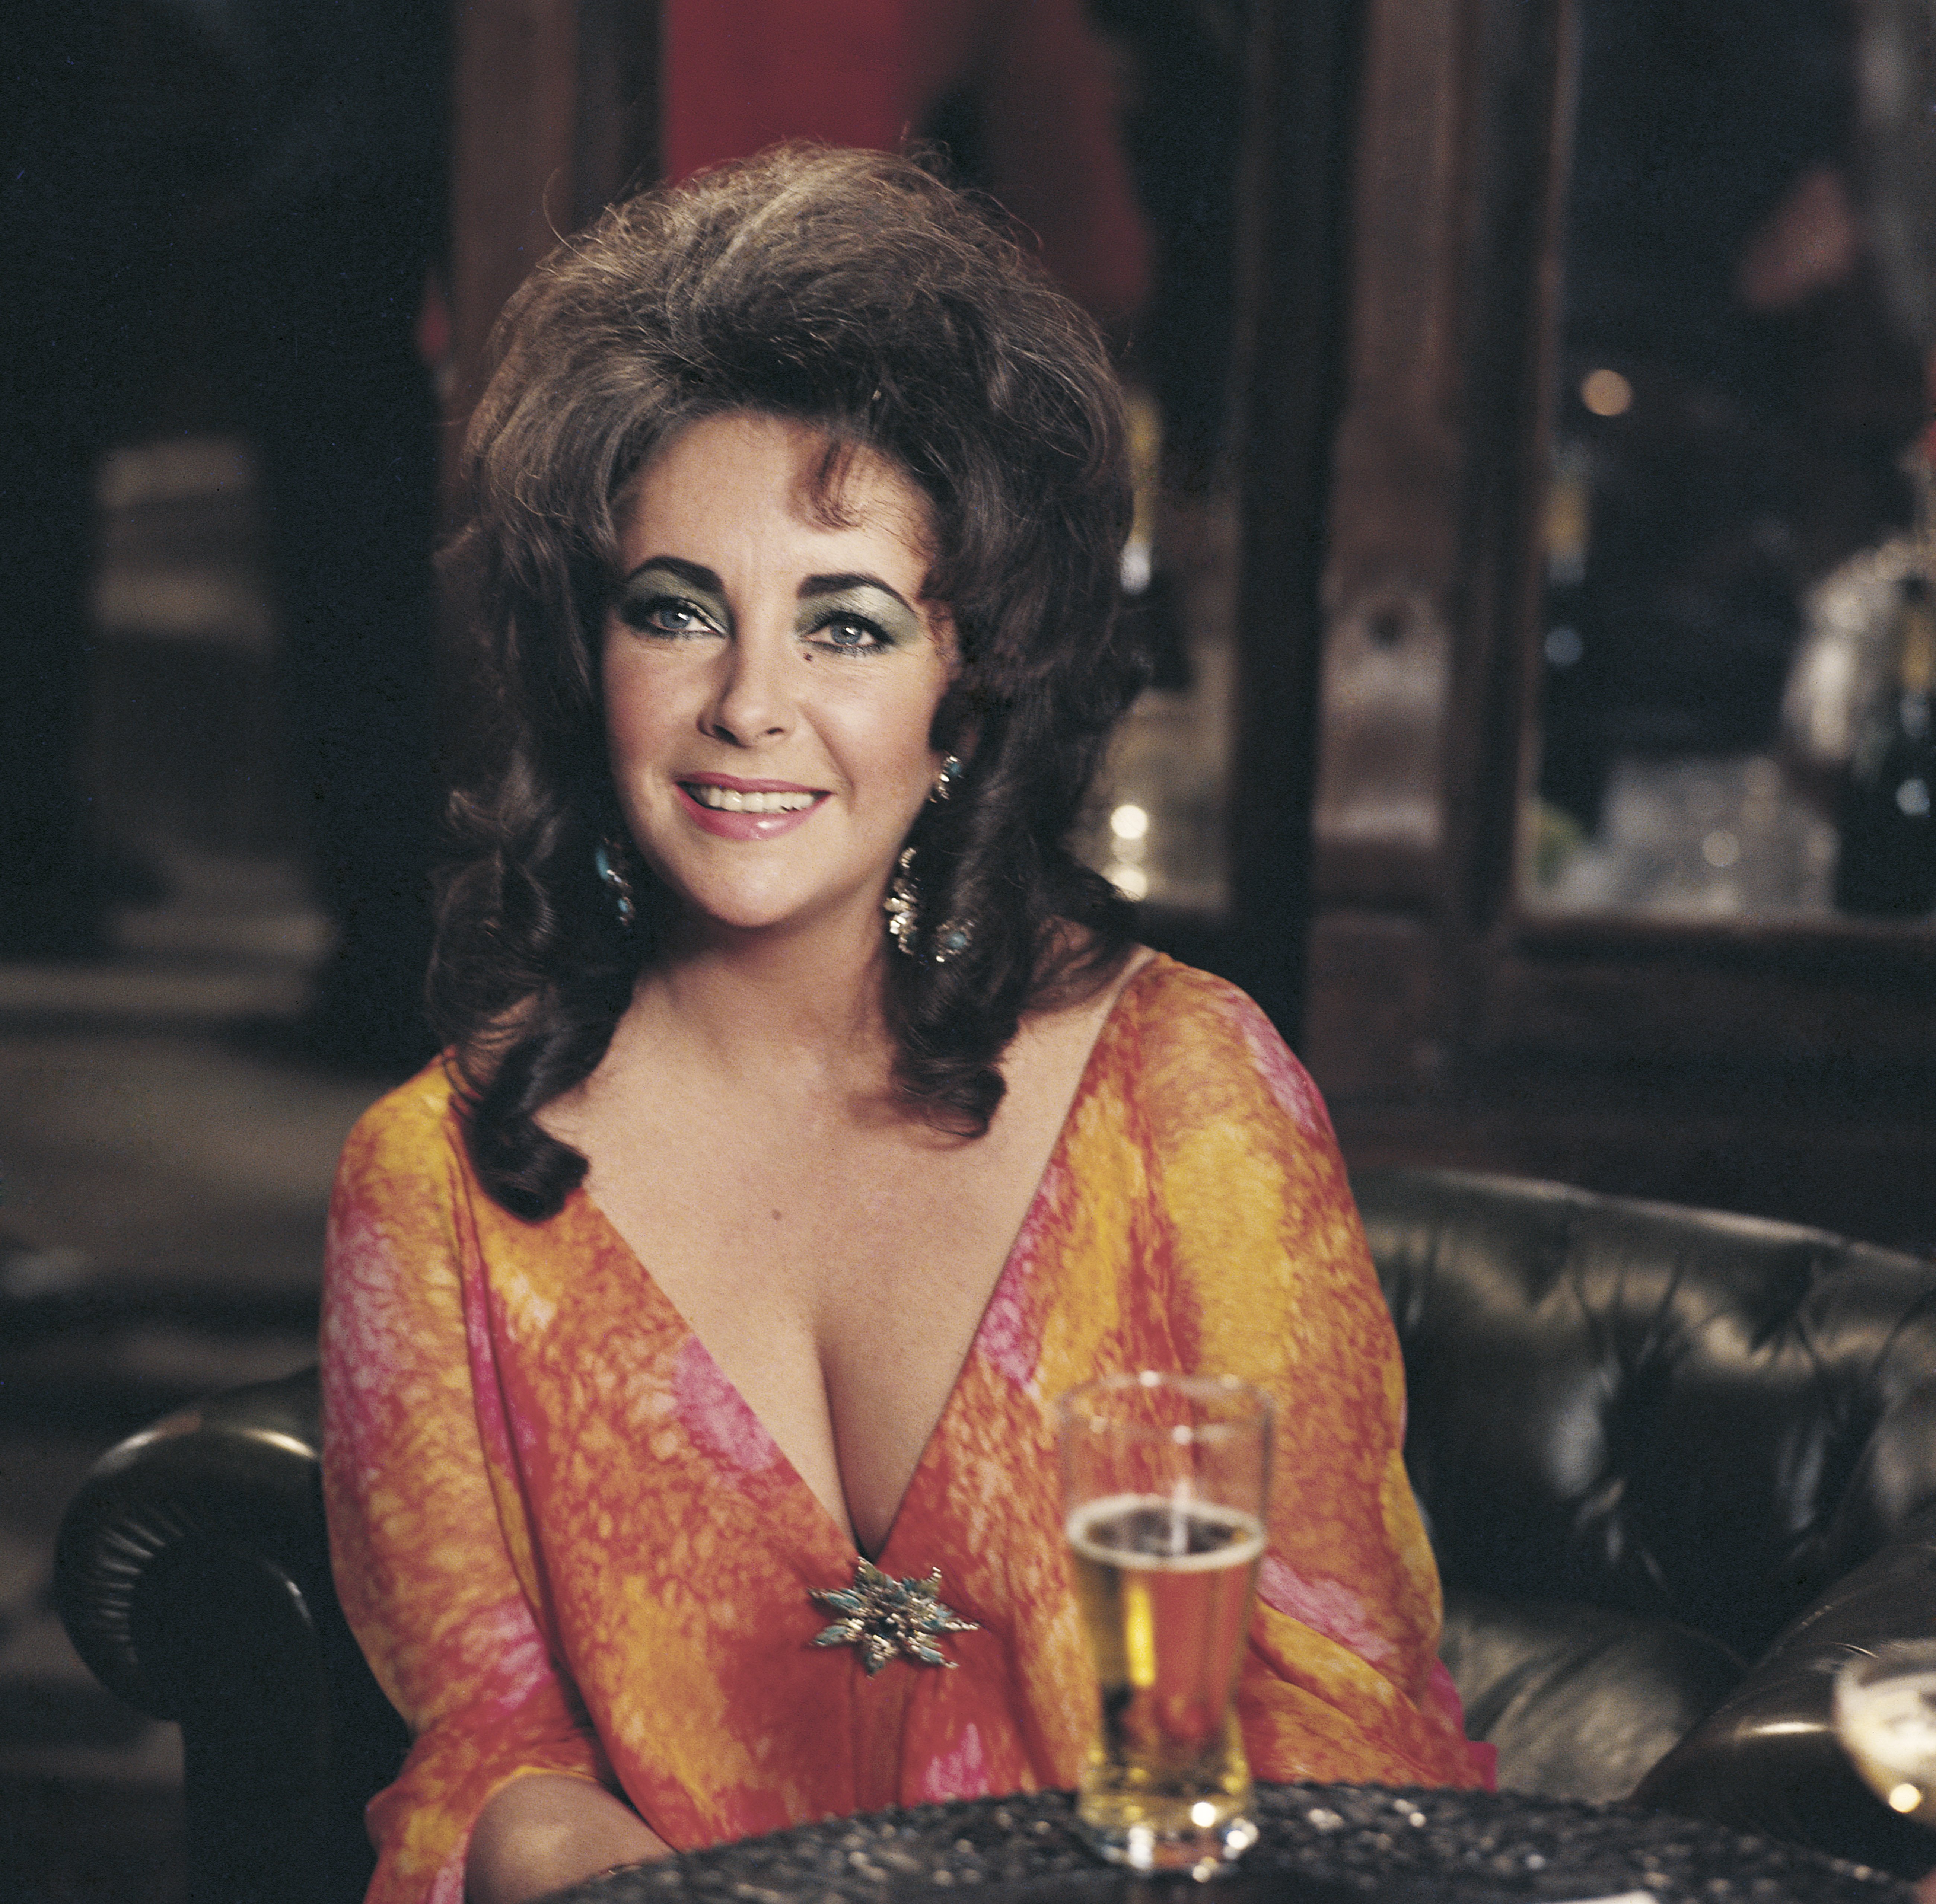 British-born American actress Elizabeth Taylor smiling wearing a low-necked dress, in front of a glass of beer. 1973. | Source: Getty Images